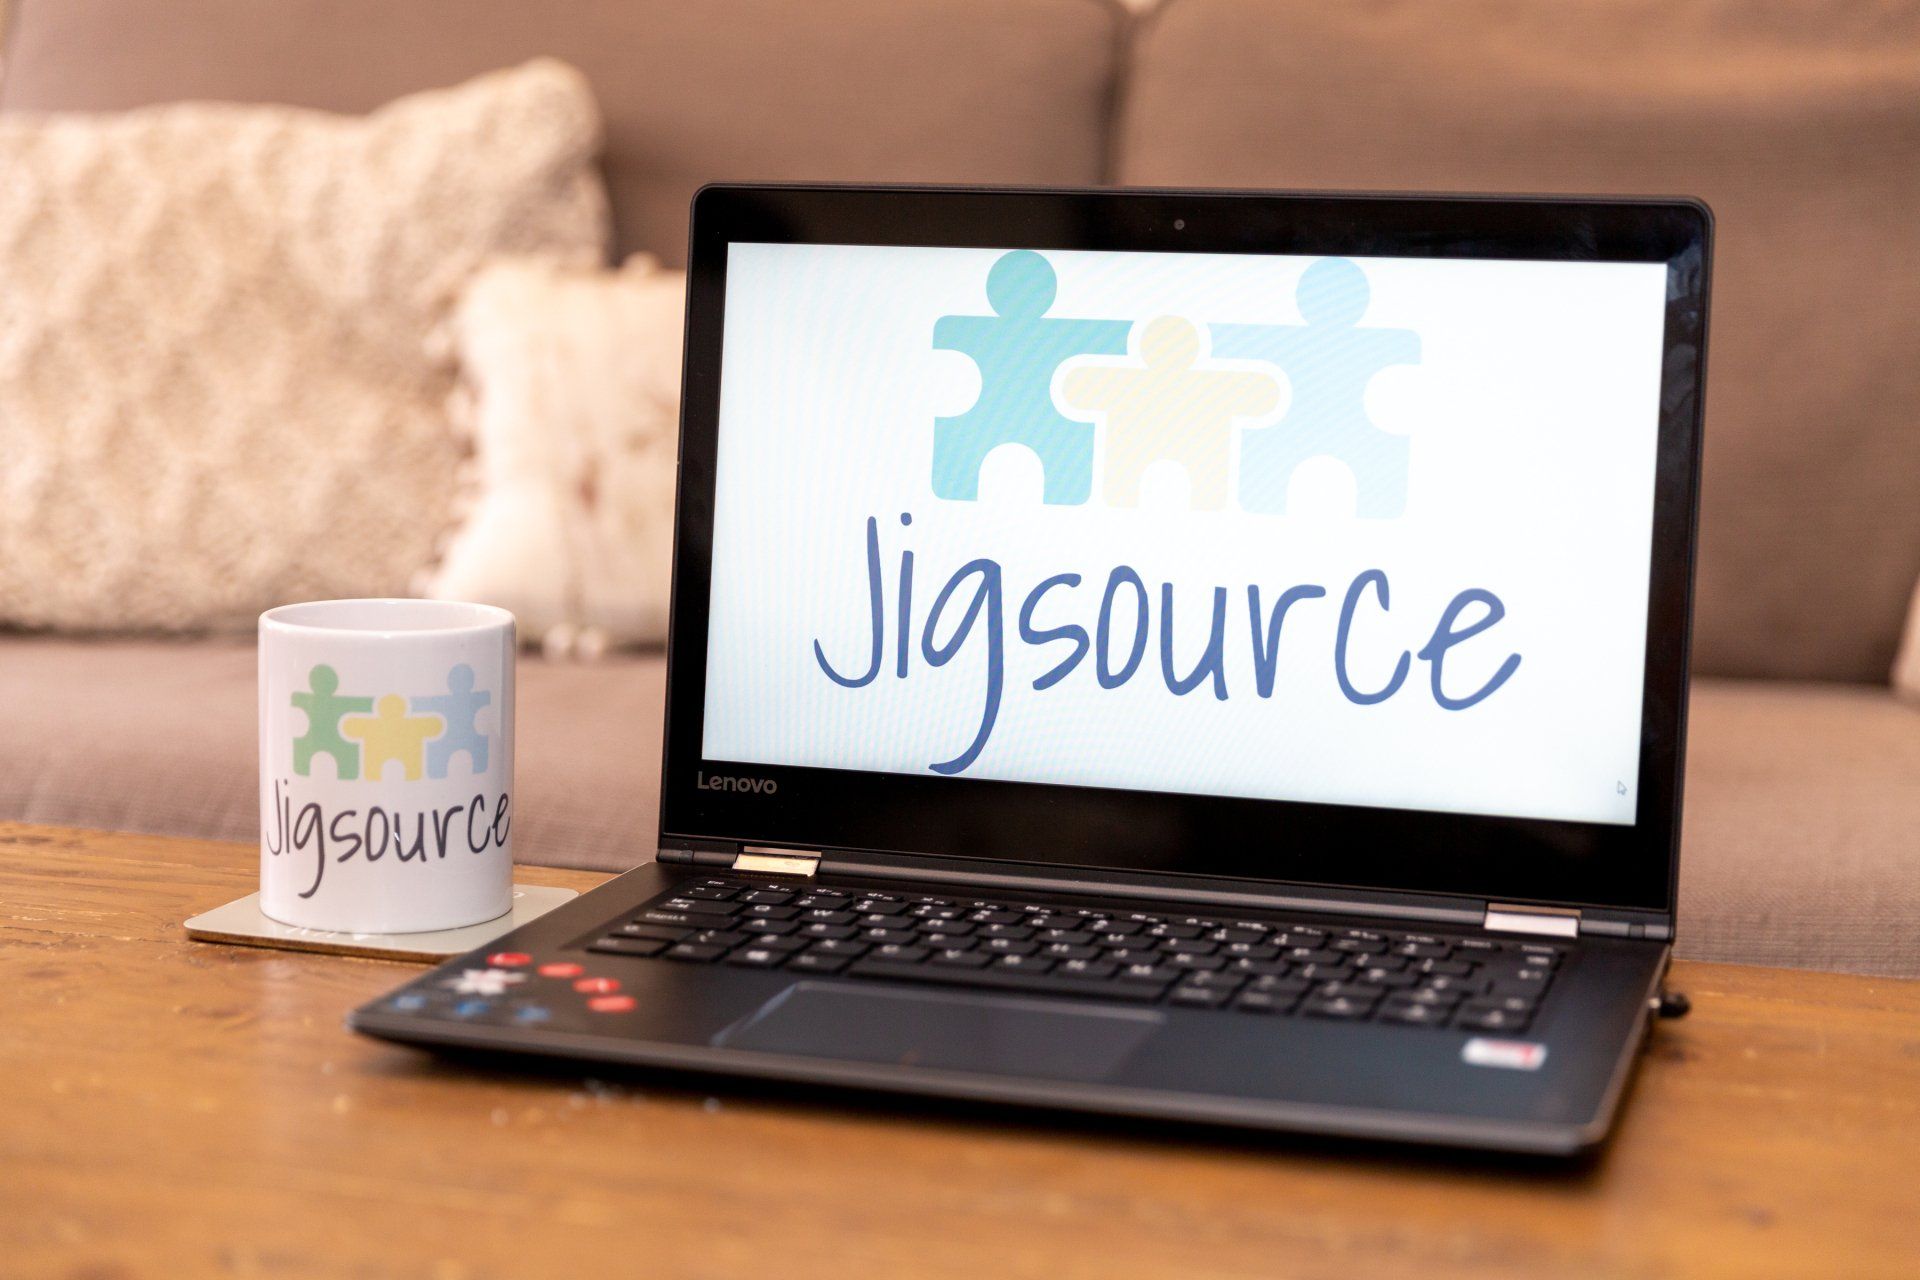 laptop with jigsource logo